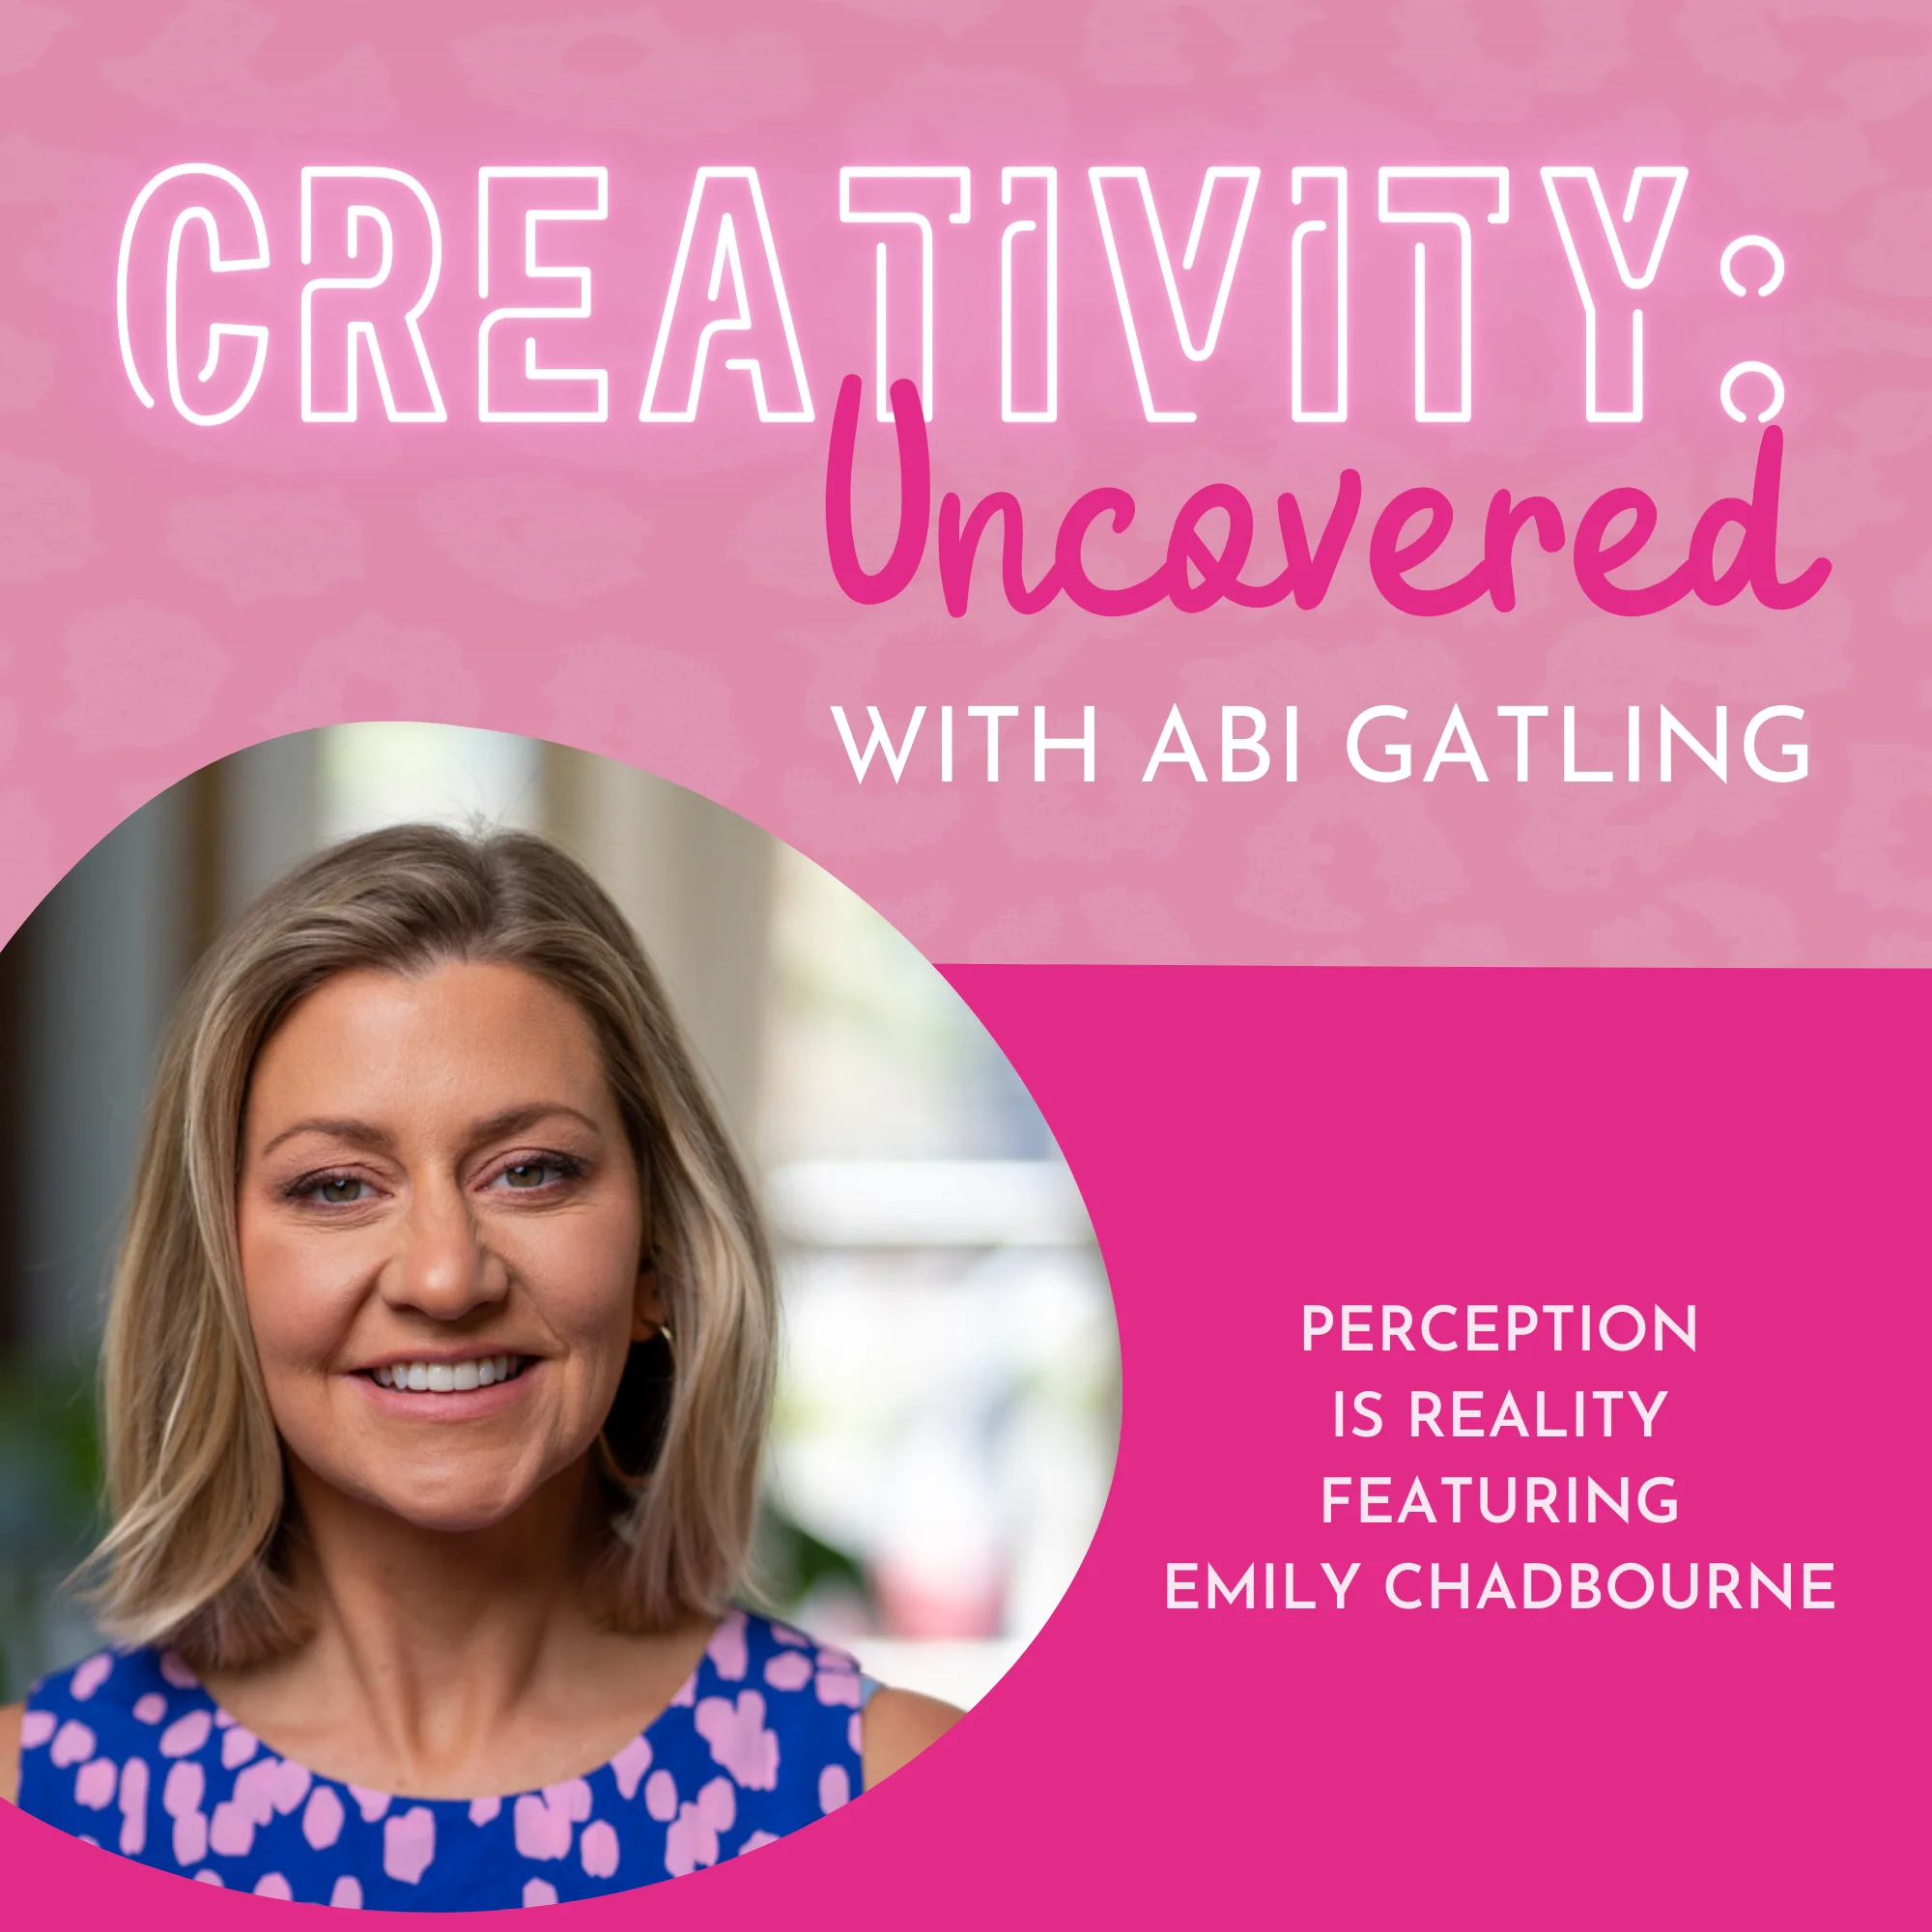 Creativity: Uncovered podcast episode graphic featuring guest Emily Chadbourne